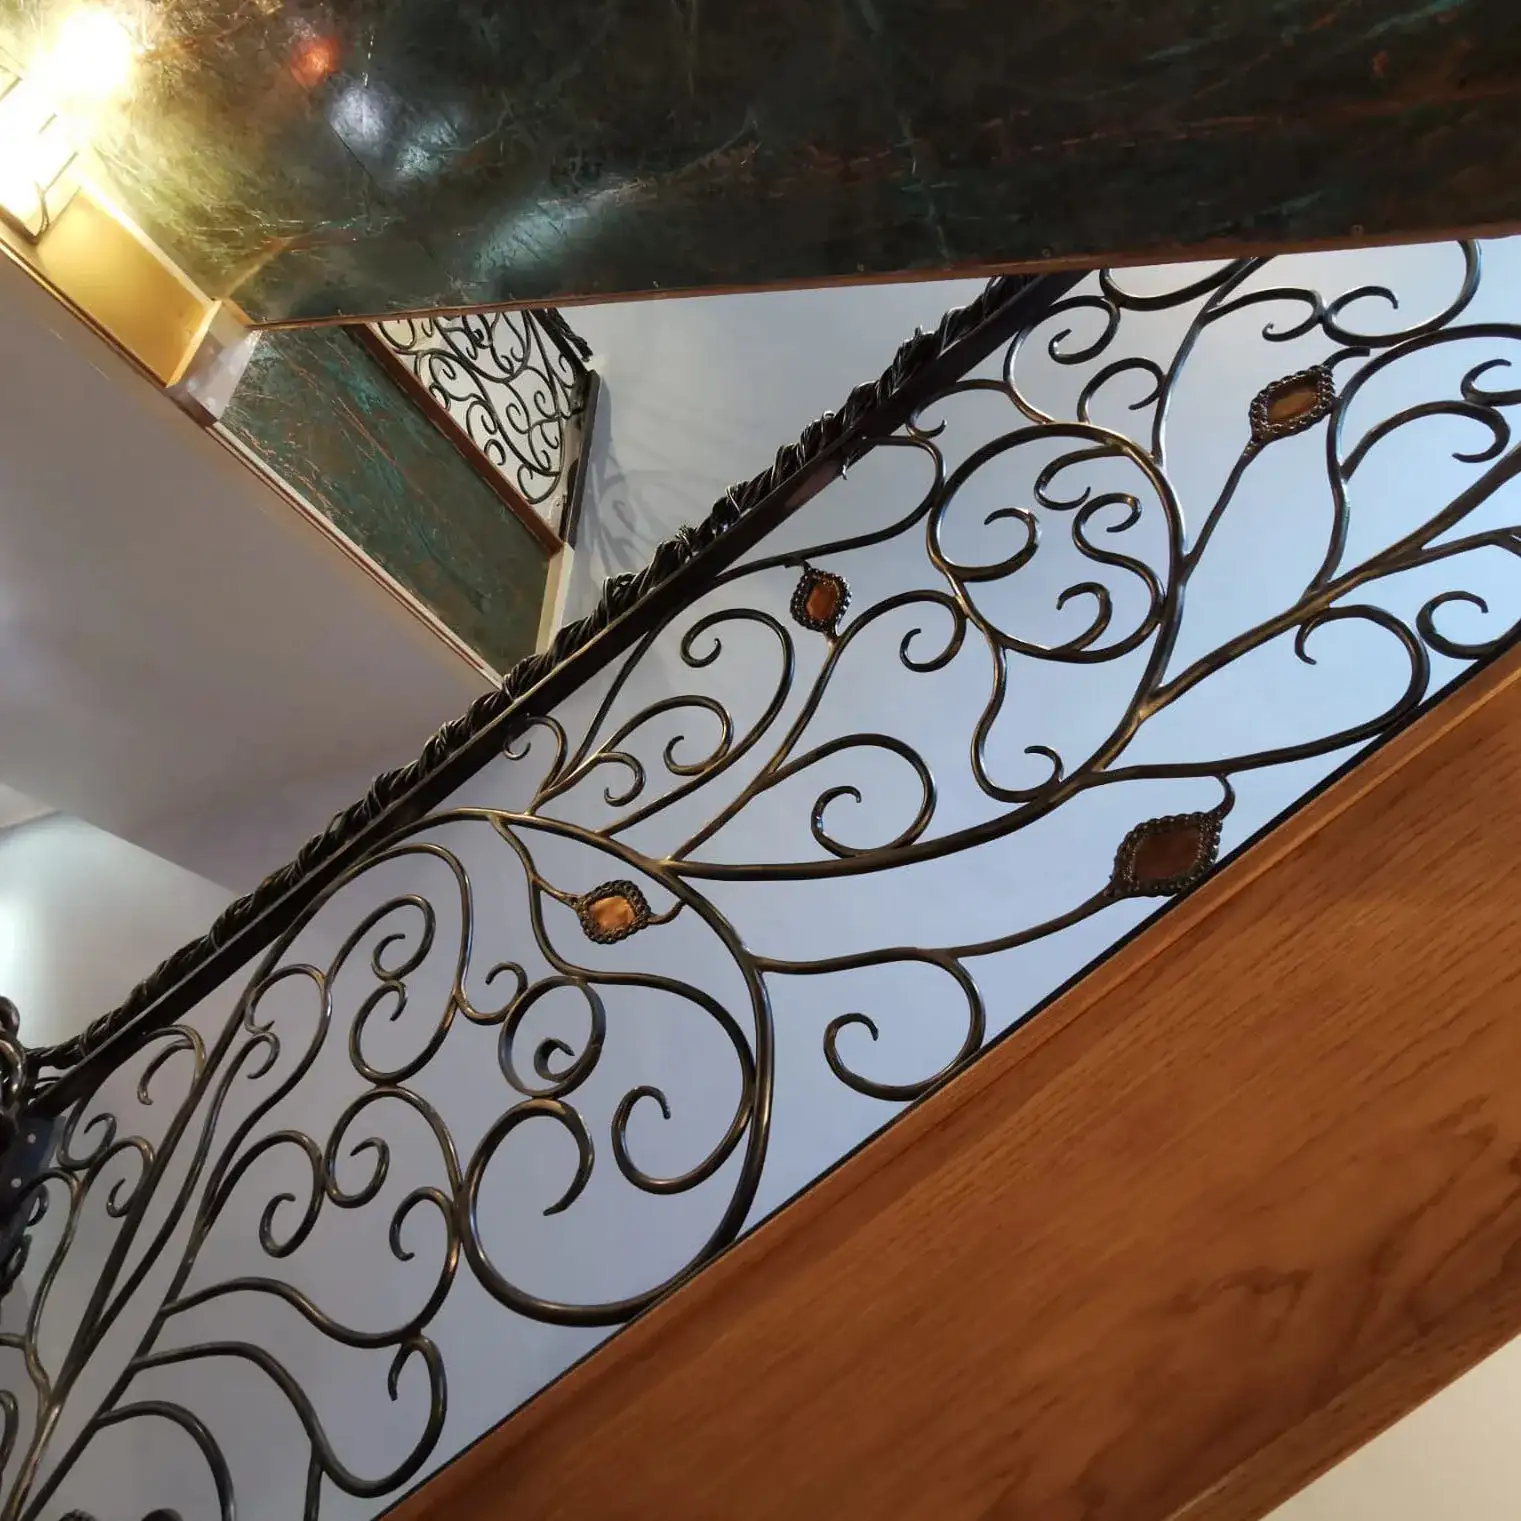 metal bannisters with stained glass detailing